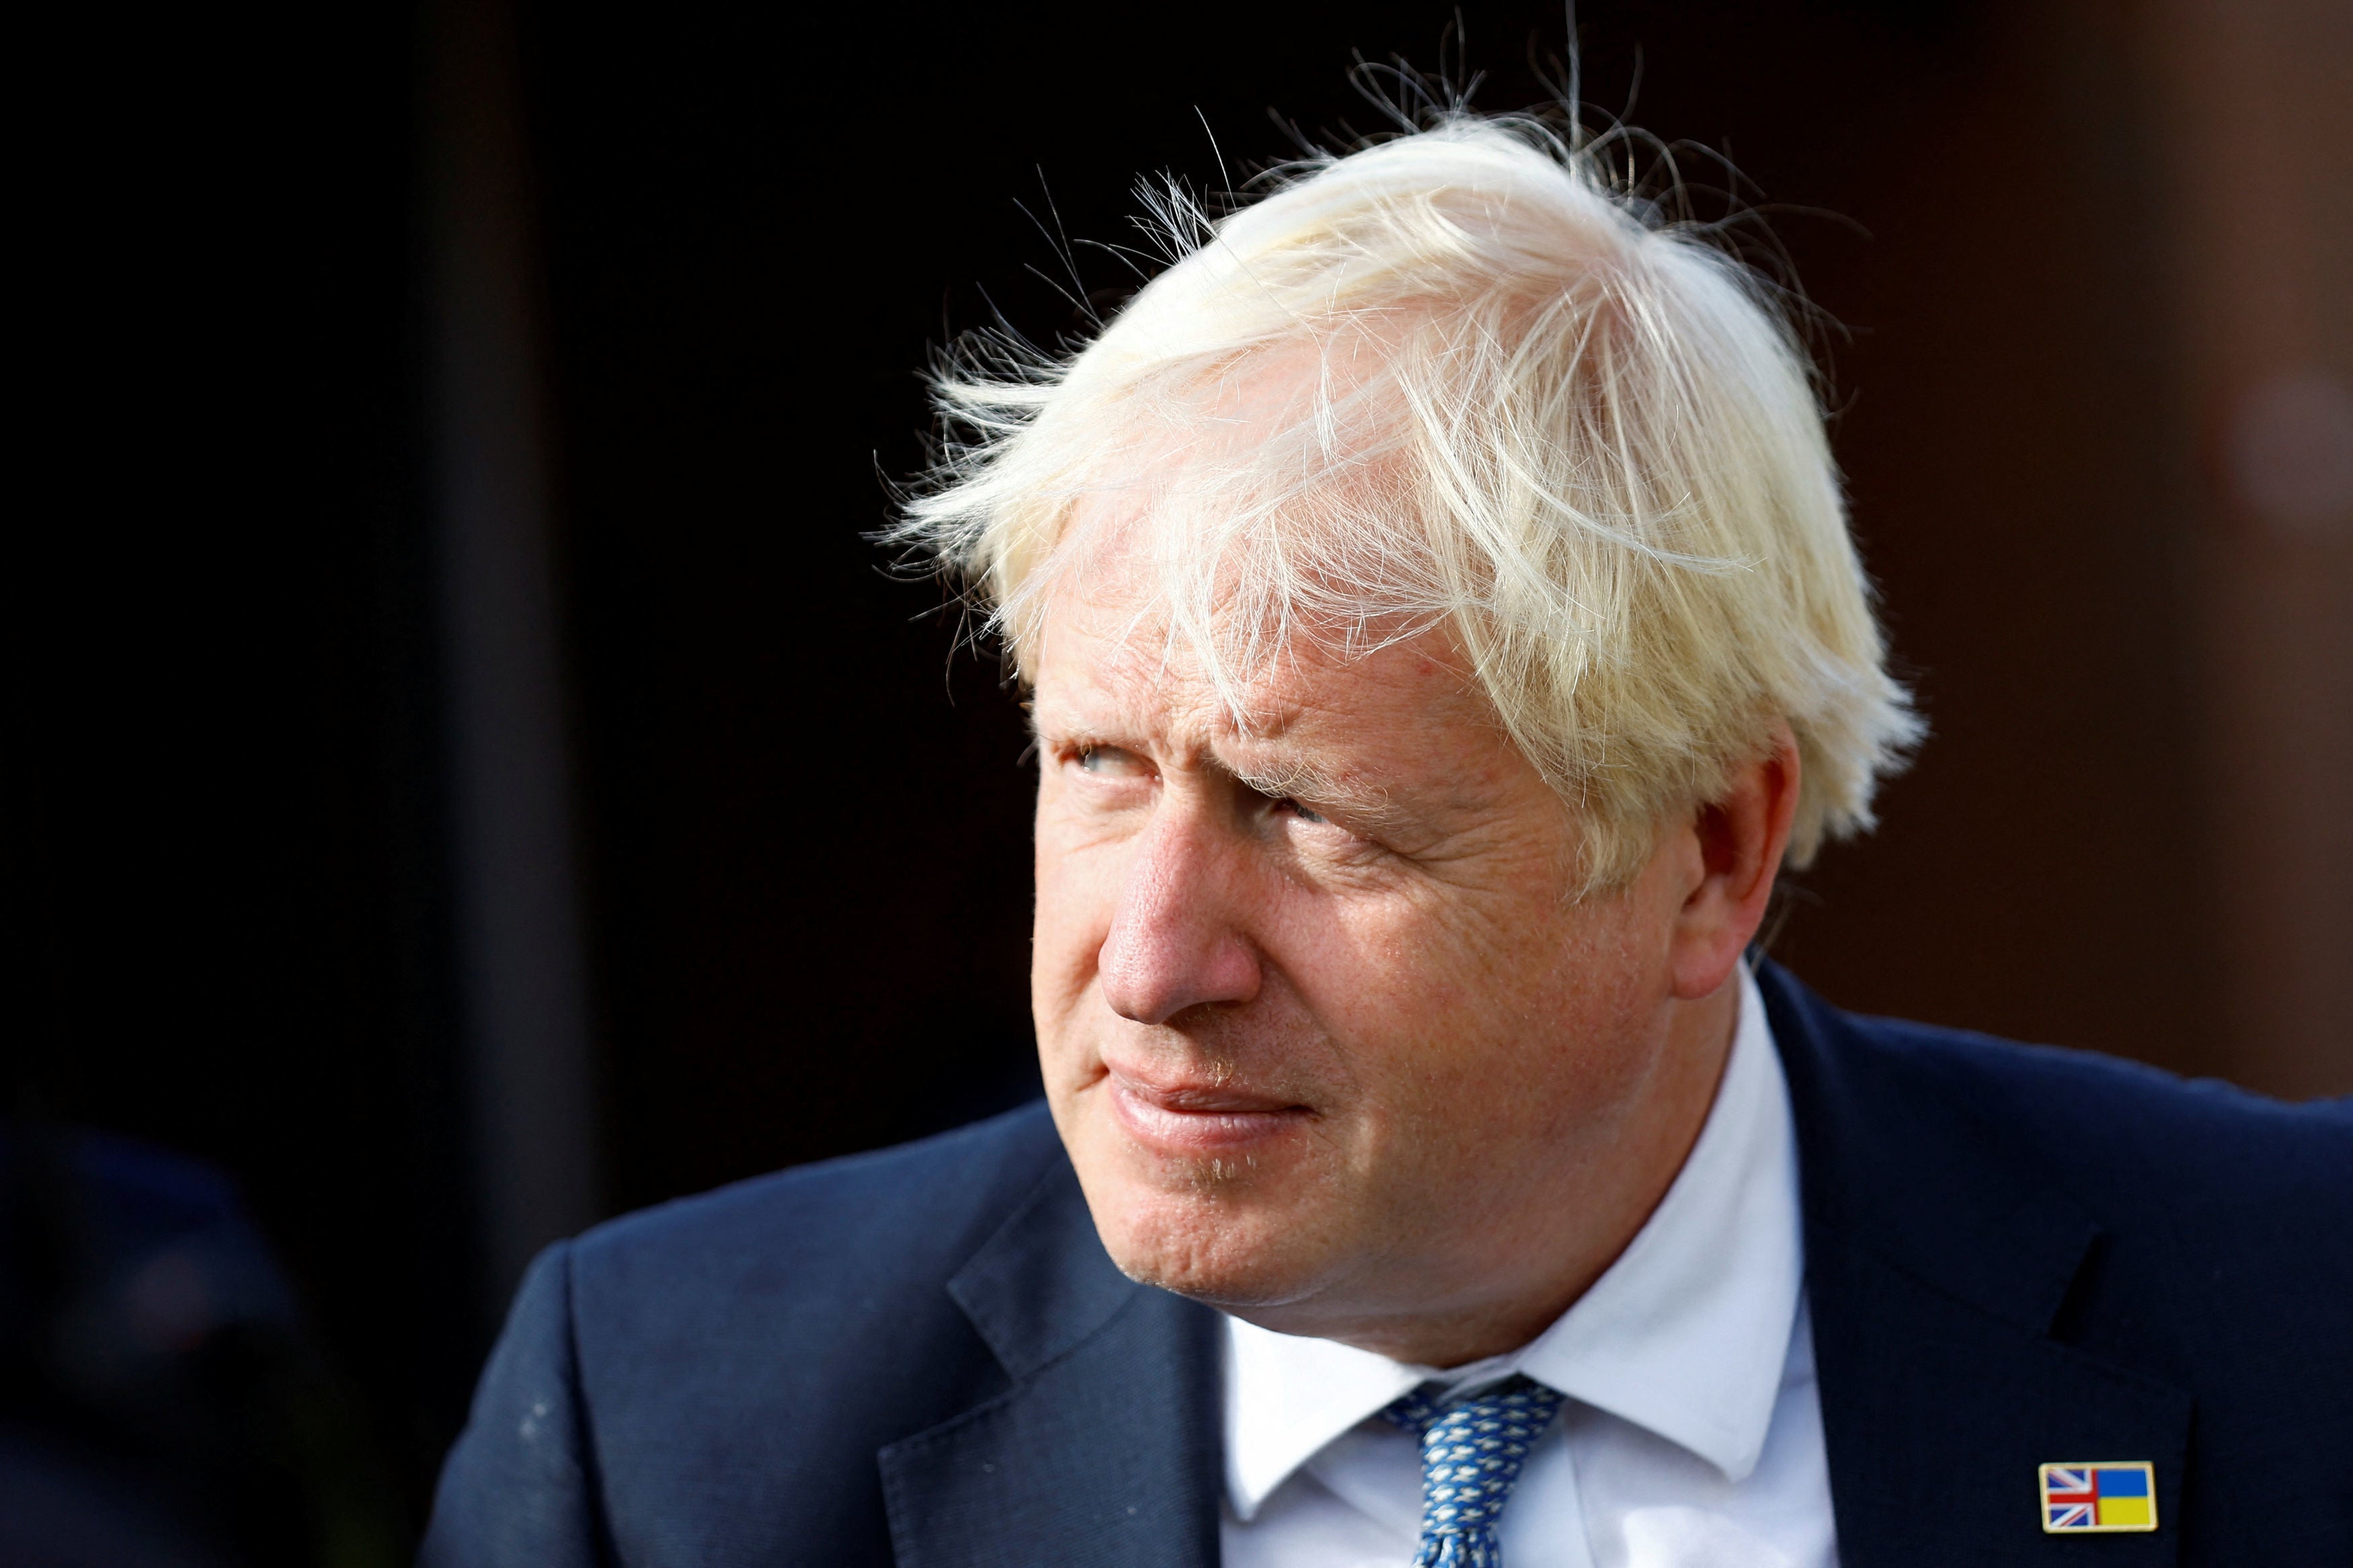 The committee is required to decide whether Johnson ‘knowingly misled’ the Commons